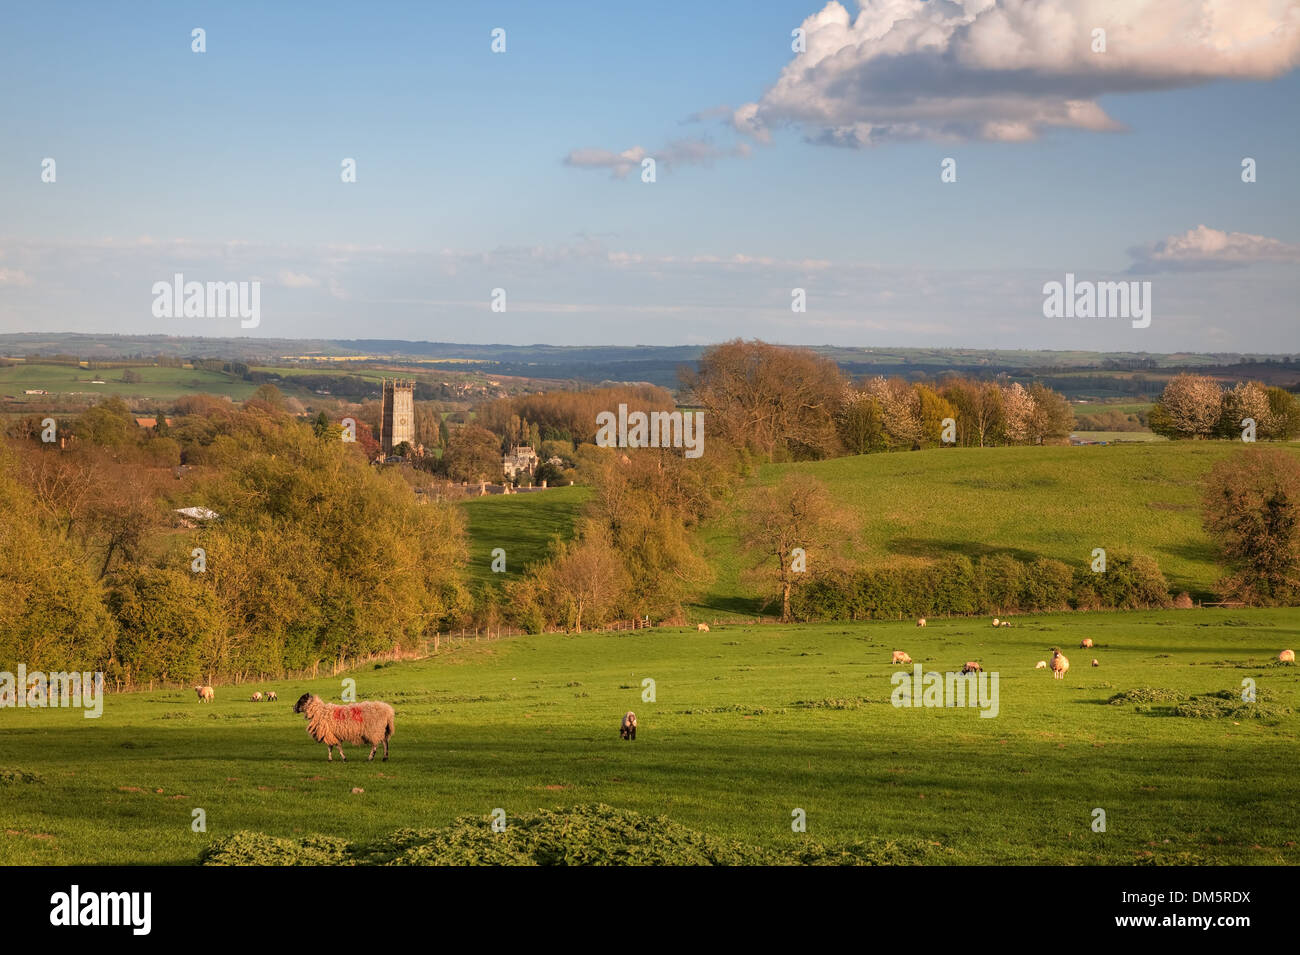 Looking over rural Gloucestershire towards the Cotswold town of Chipping Campden, England. Stock Photo